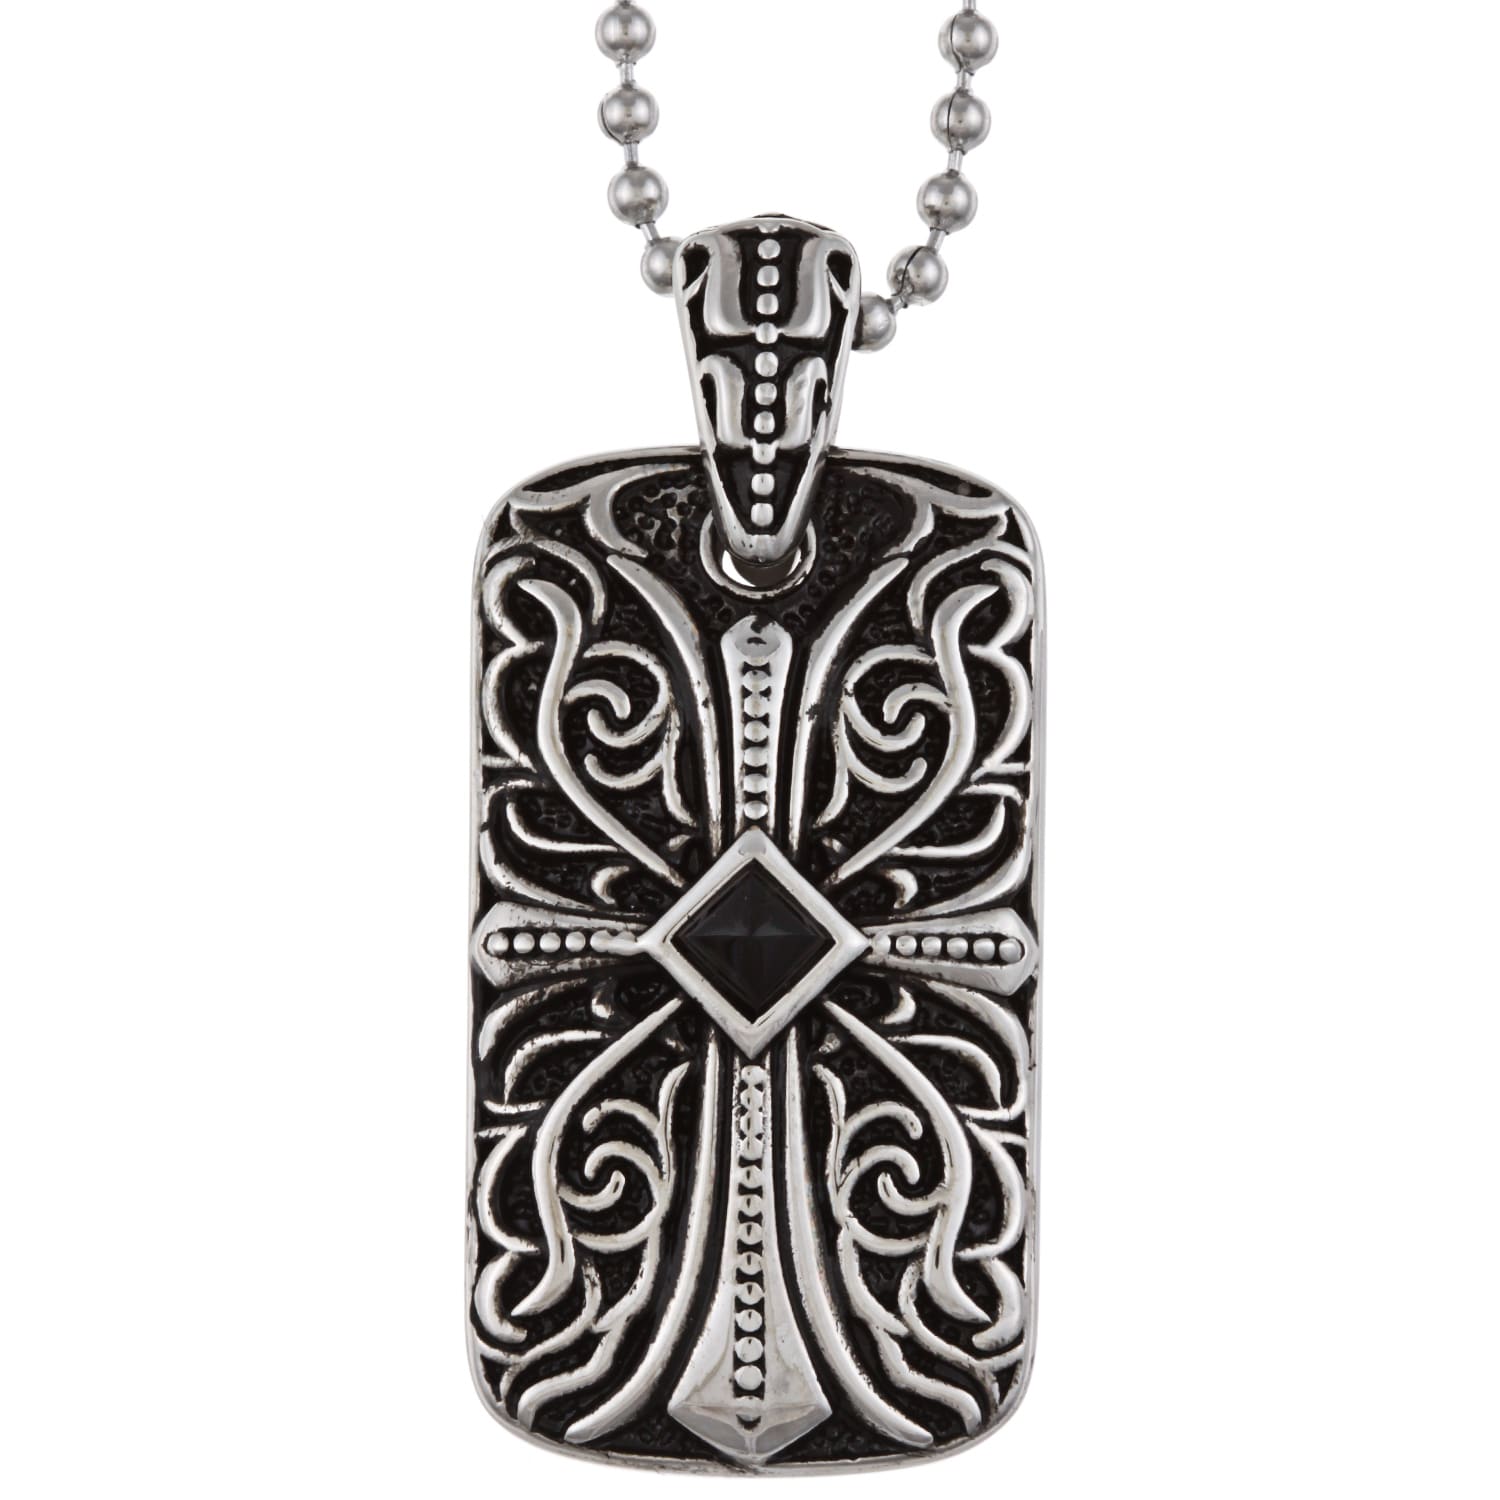 Stainless Steel Men's Black Onyx Cross Dog Tag Necklace - Free Shipping ...